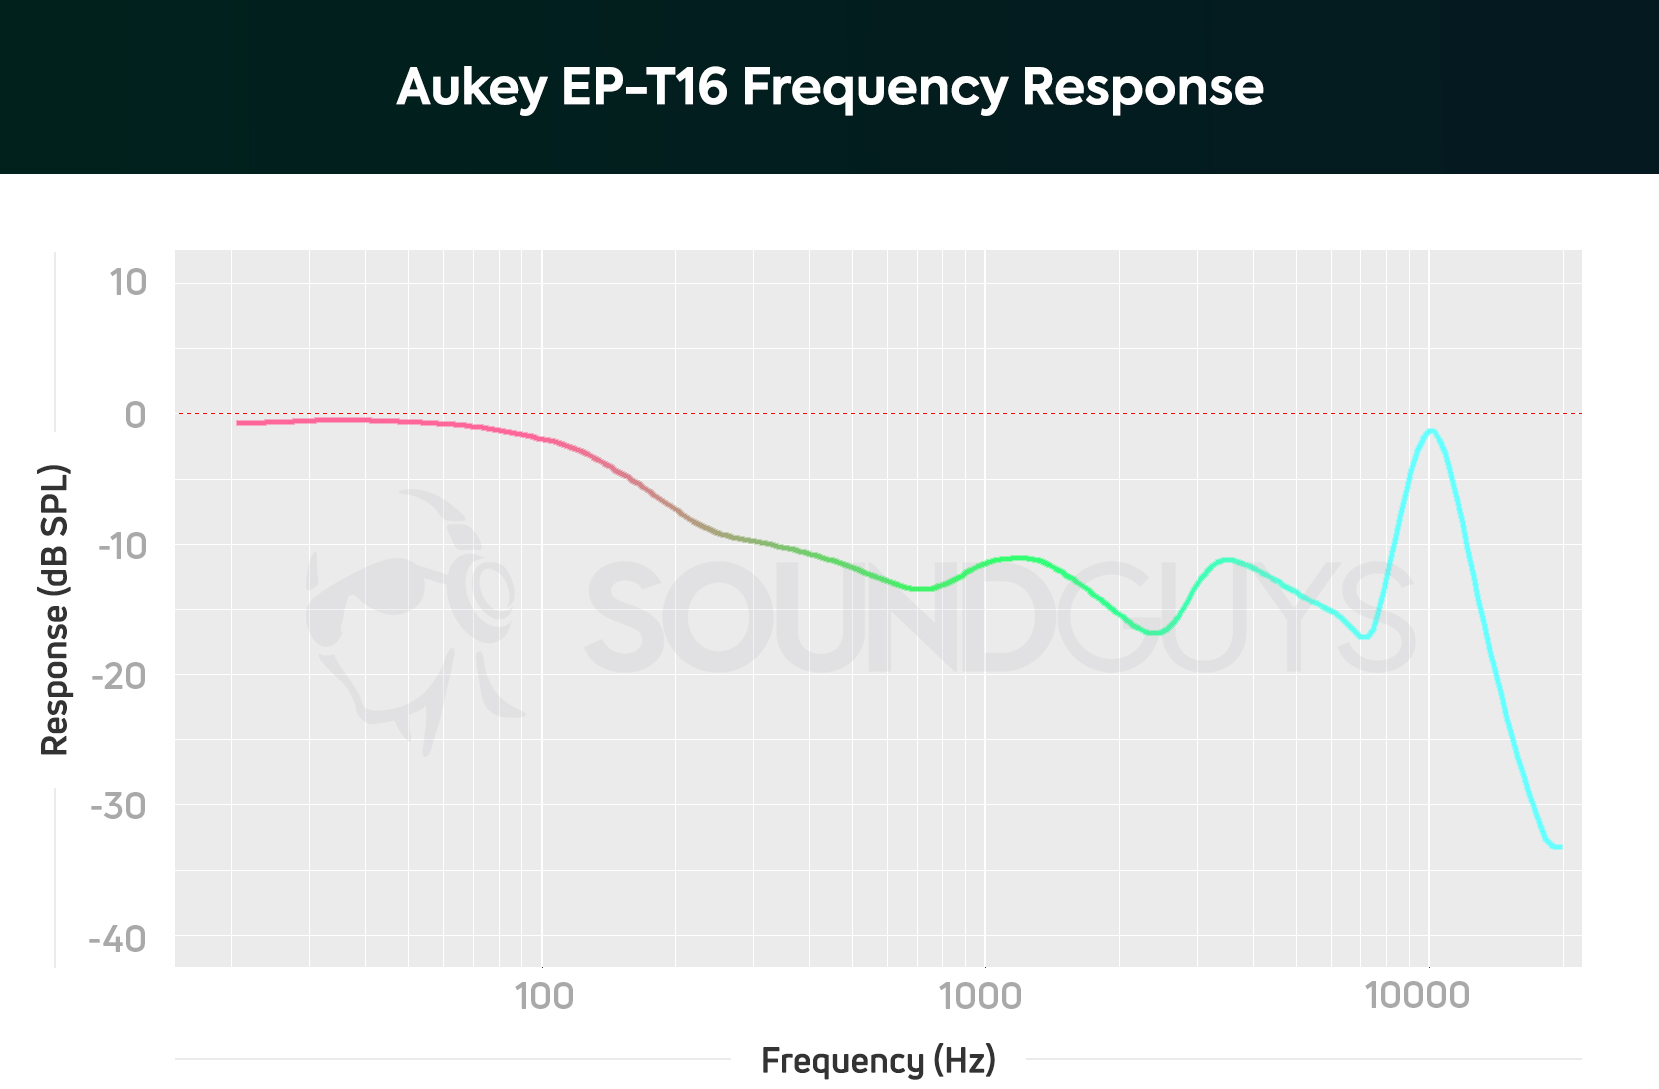 Aukey EP-T16 frequency response chart.